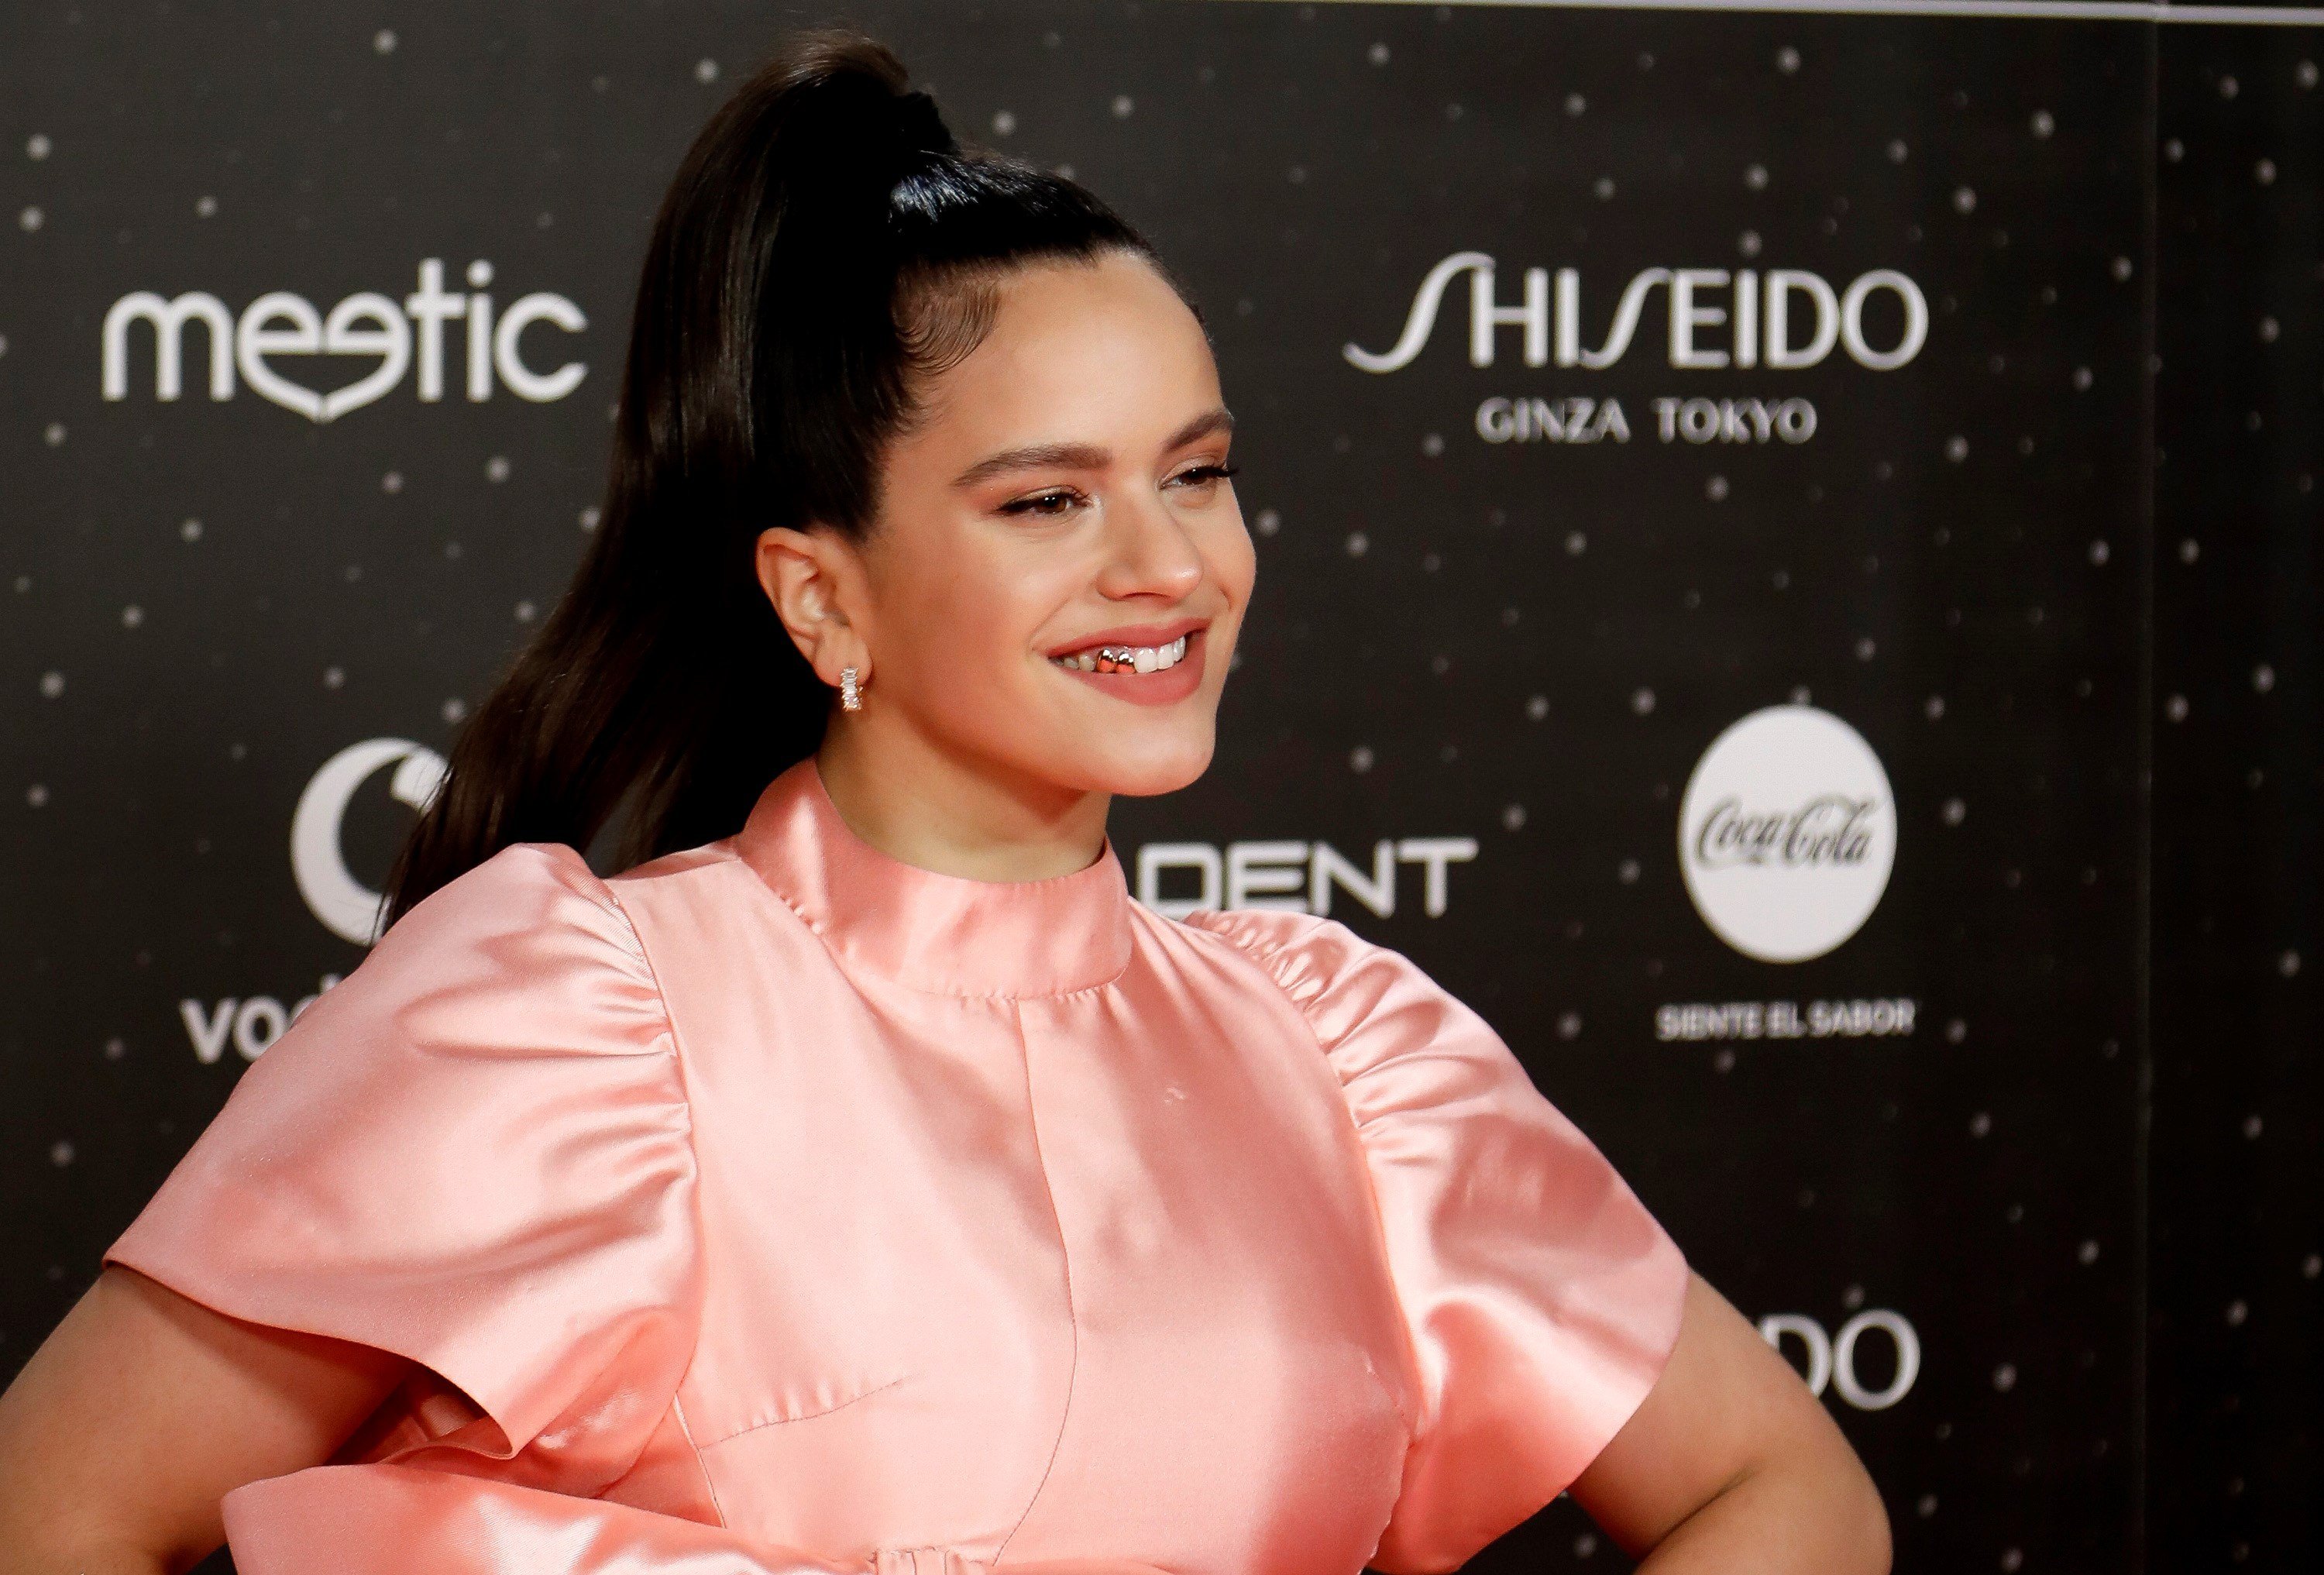 "Con altura" by Rosalía, second most-viewed music video worldwide in 2019